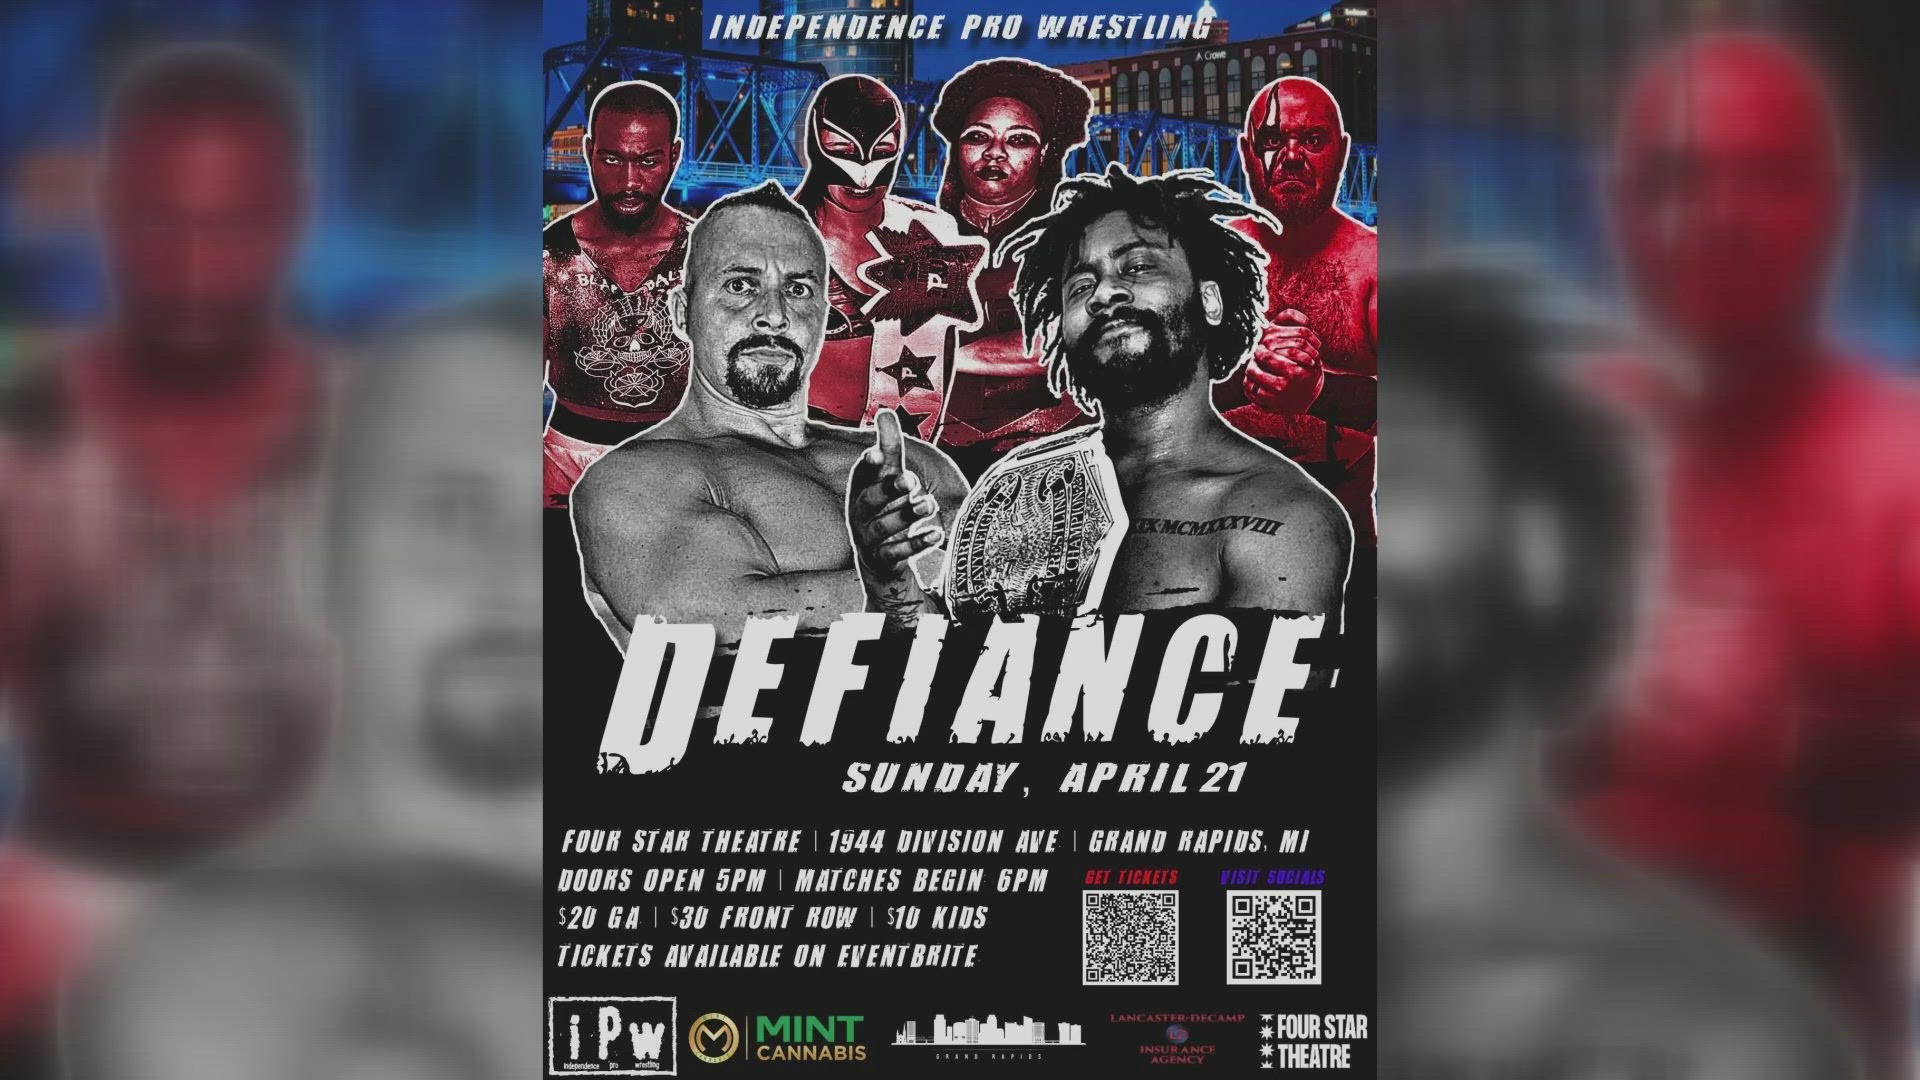 Independence Pro Wrestling has an event tonight at the Four Star Theatre in Grand Rapids